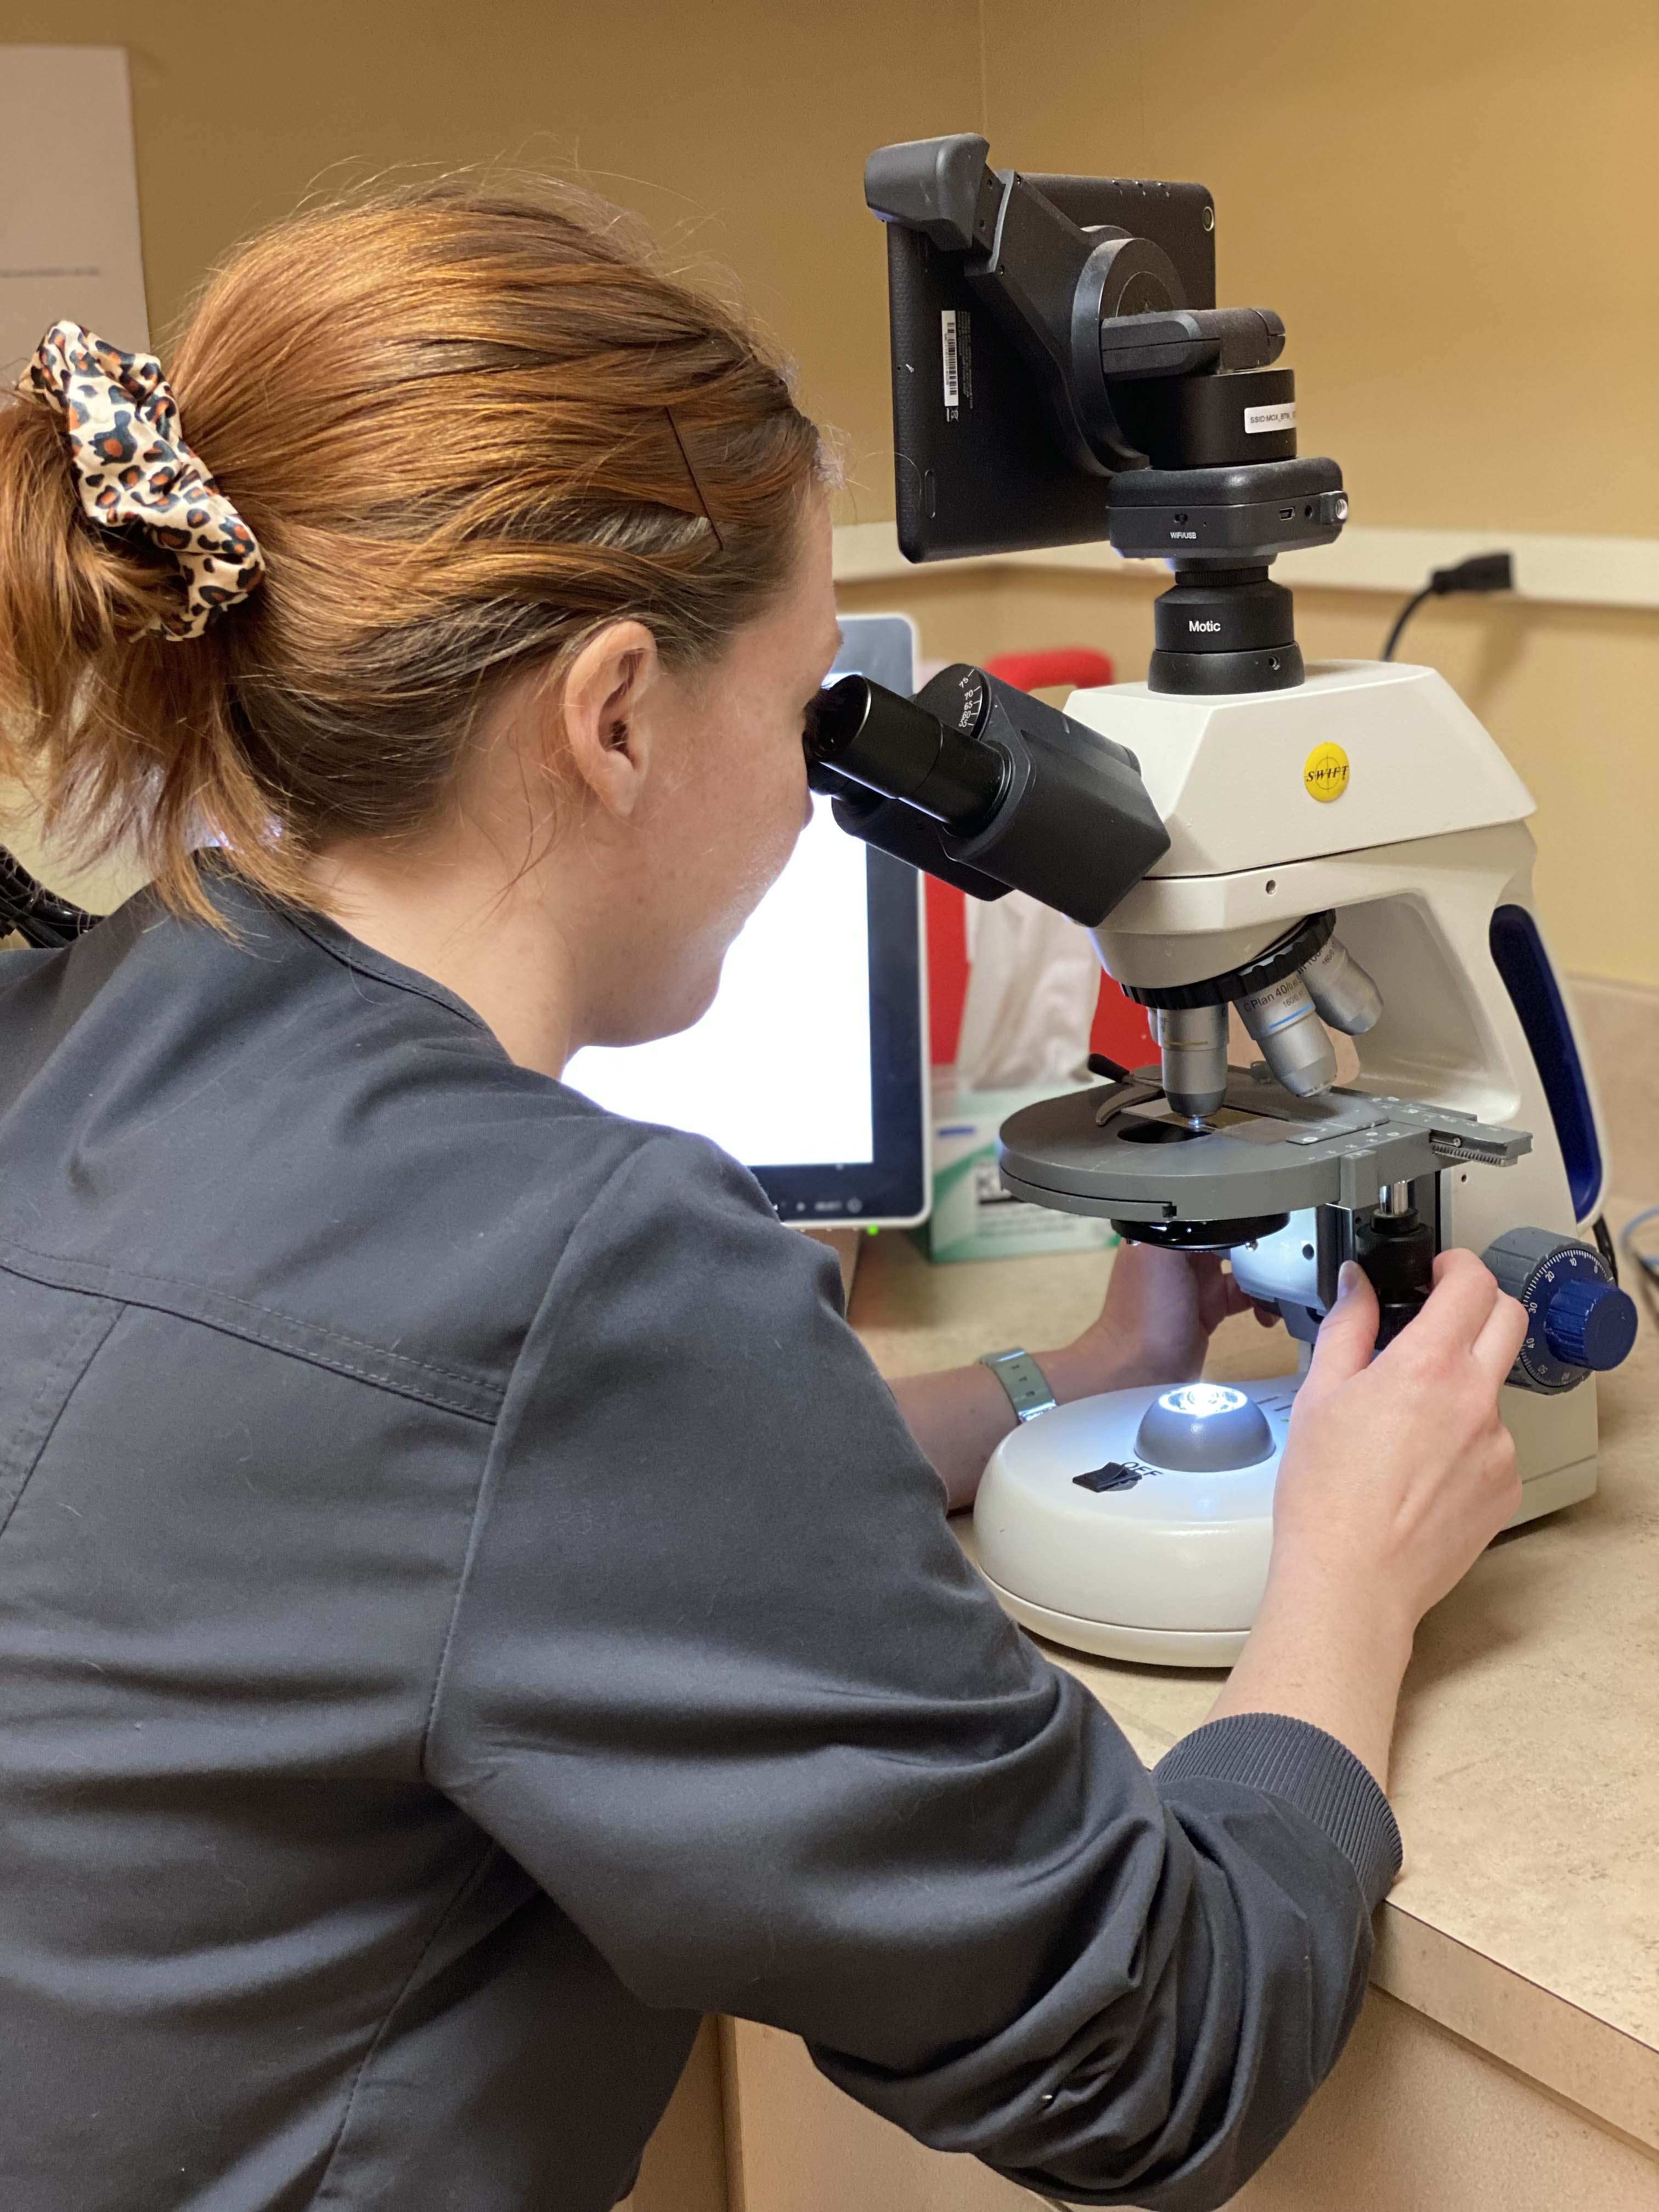 One of our team members examines a sample using a microscope in our on-site diagnostic laboratory.